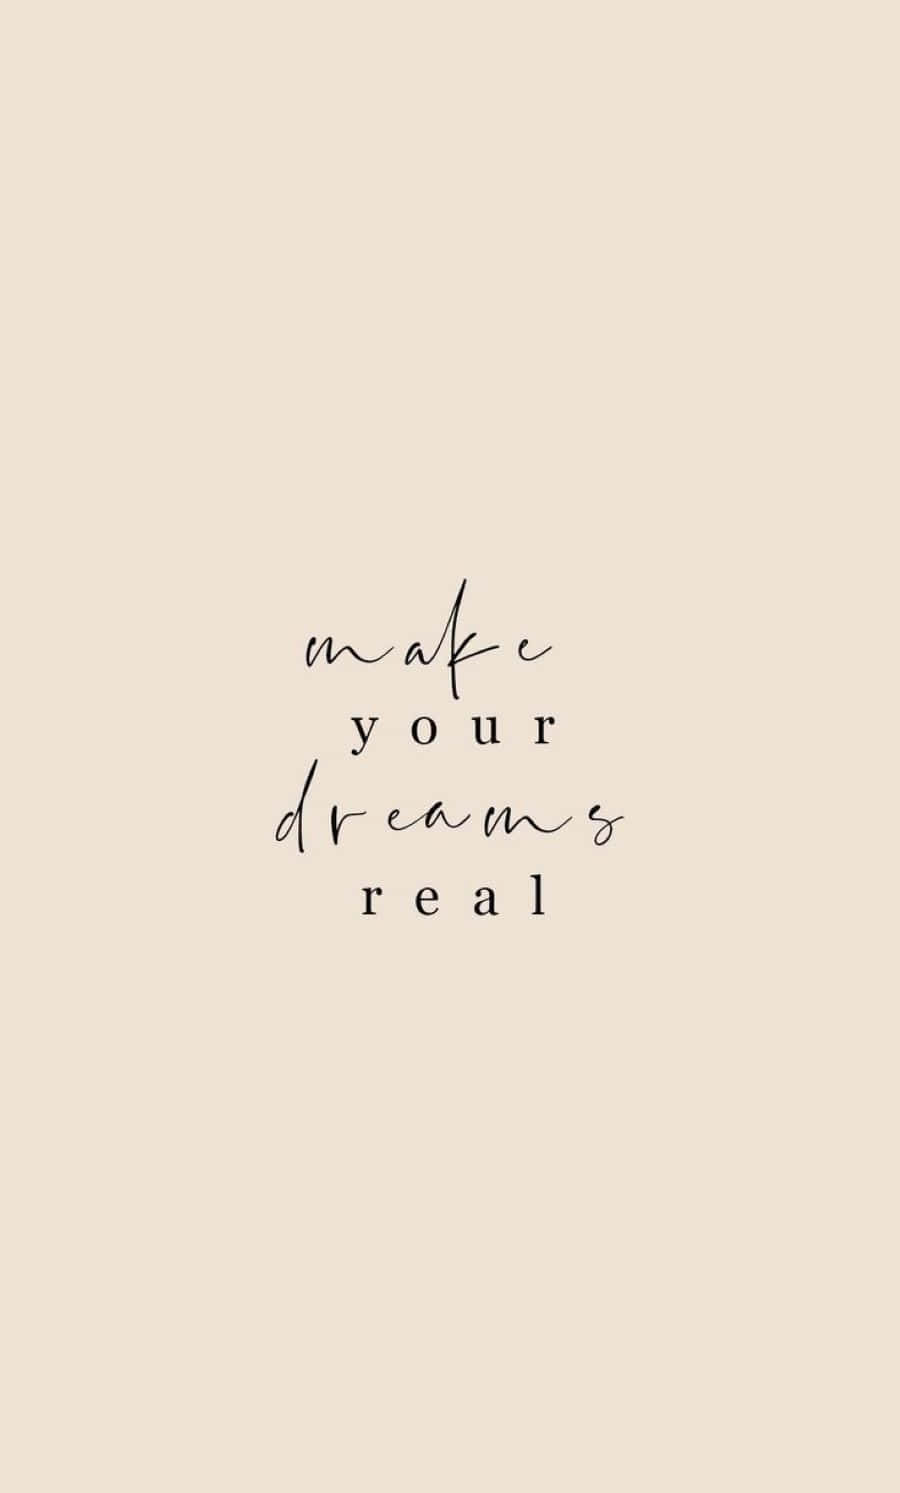 Make Your Dreams Real Inspirational Quote Wallpaper